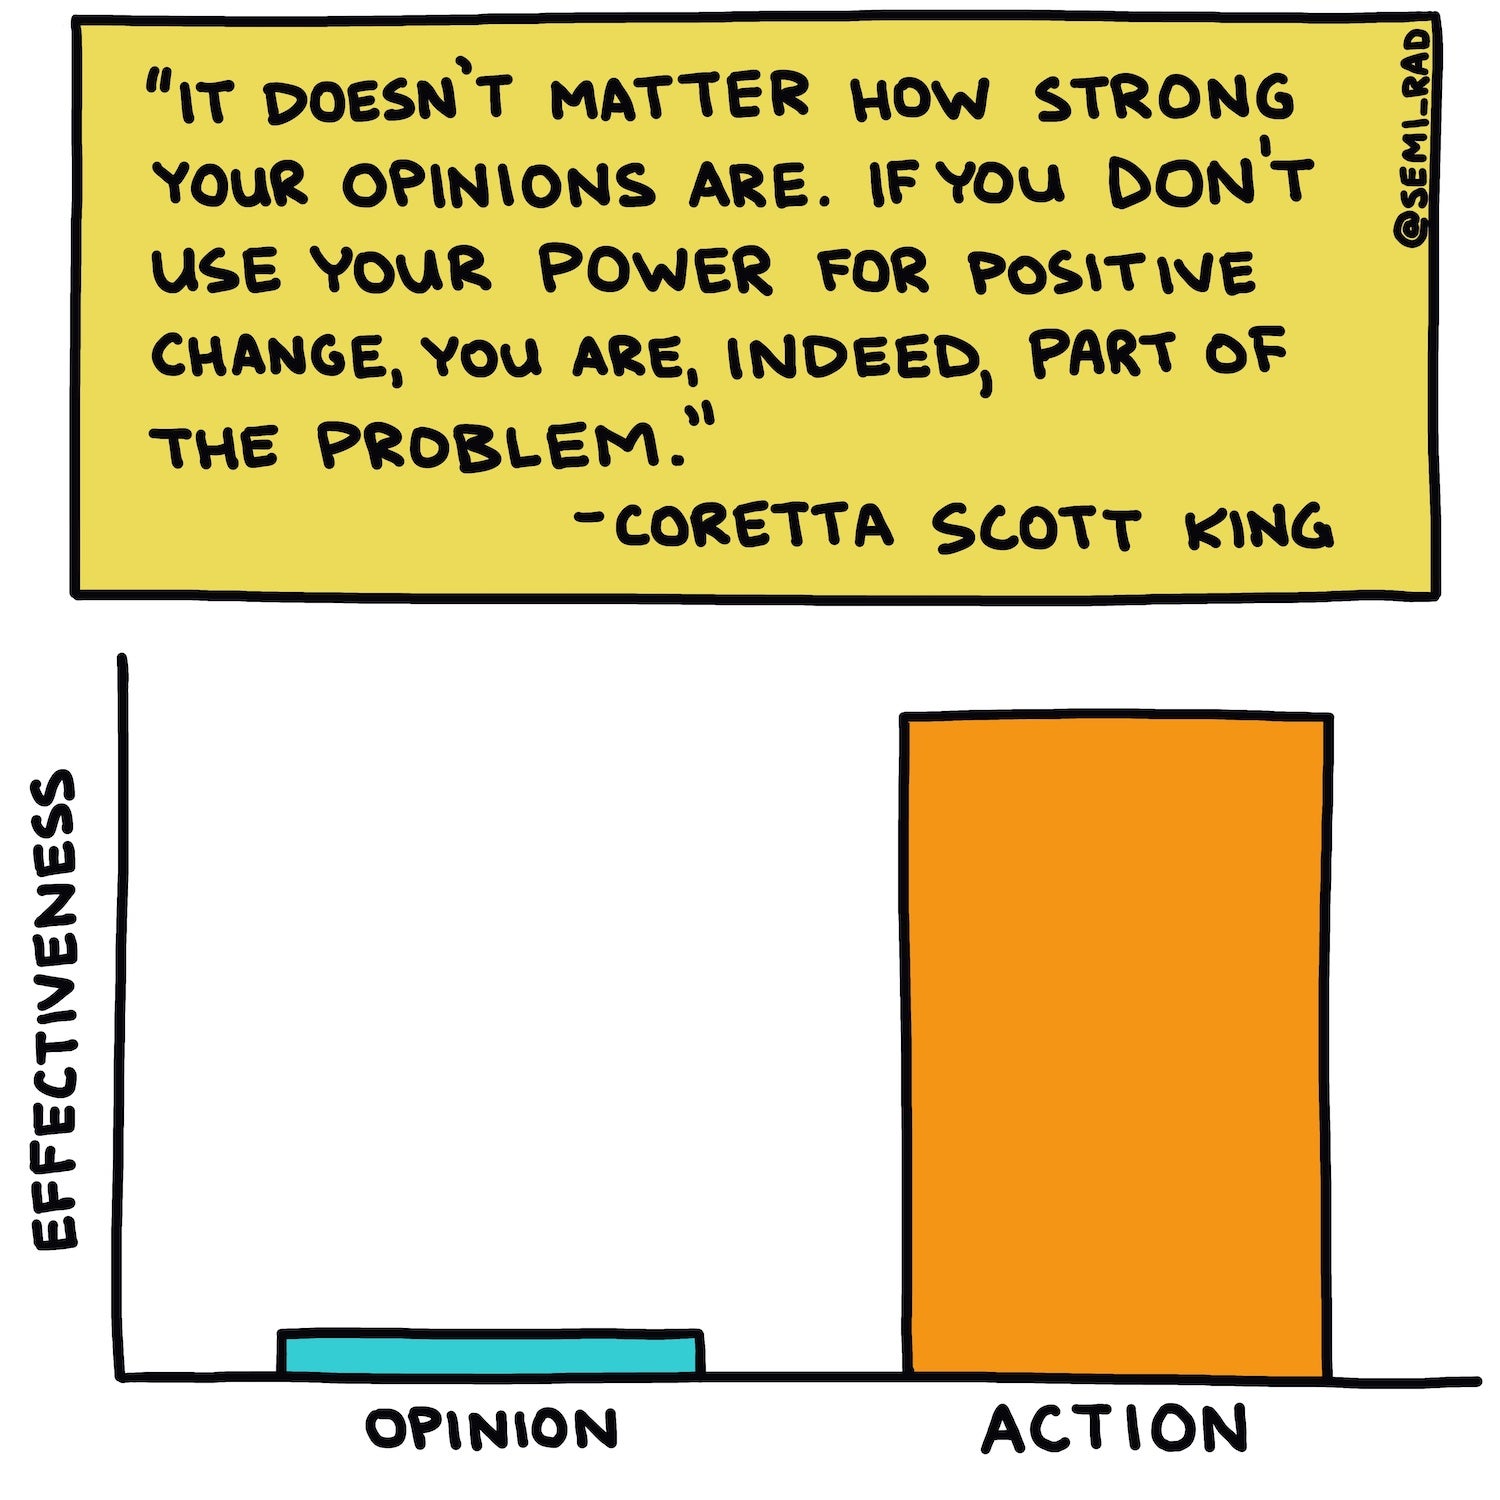 graph about how opinion and action lead to effectiveness with Coretta Scott King quote